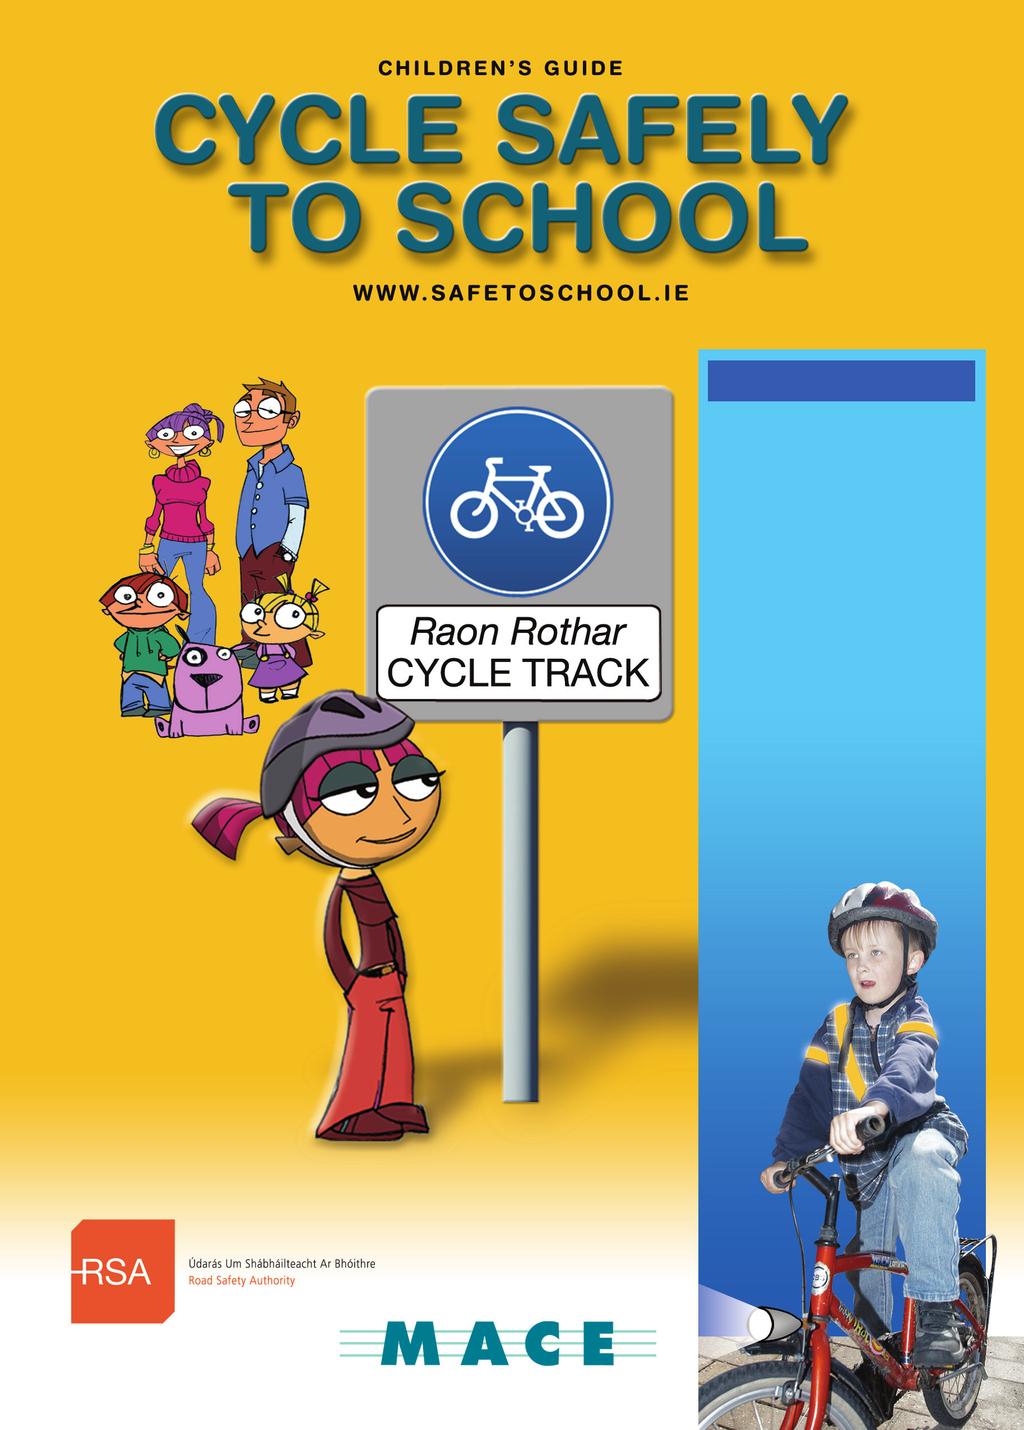 M CYCLE CGUIDE A //08 :8 PM Page Guide Contains: Cycling to School Safely Guide Safe Cross Code Spot the Difference Fun Poster Competition with a,000 Prize Fund Win great prizes for yourself, your